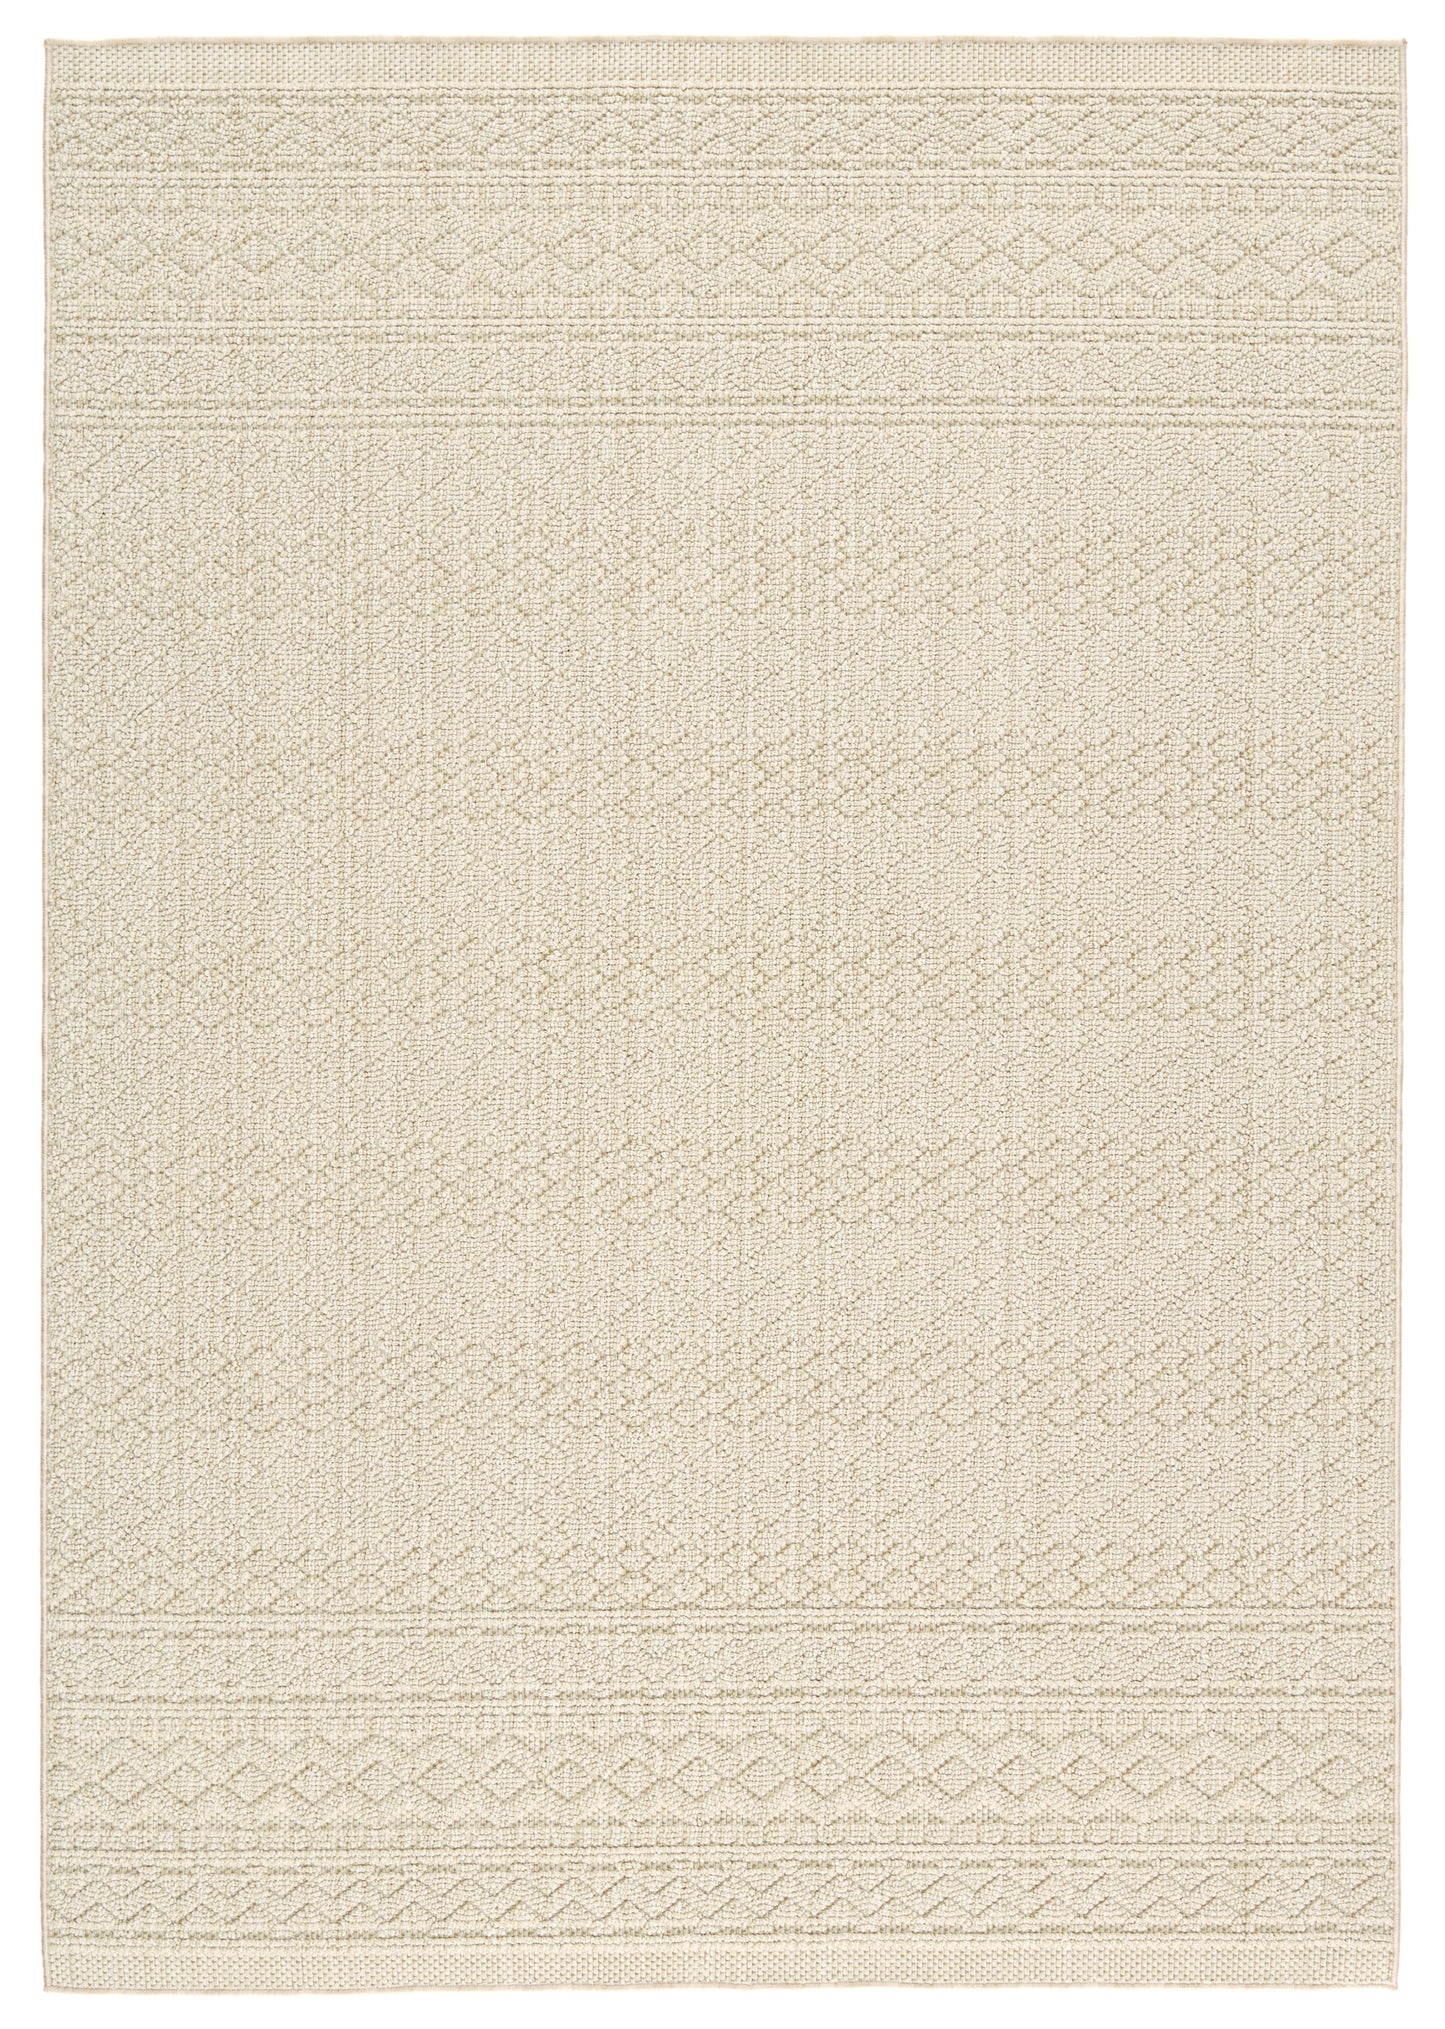 Paradizo Carina Machine Made Synthetic Blend Outdoor Area Rug From Jaipur Living